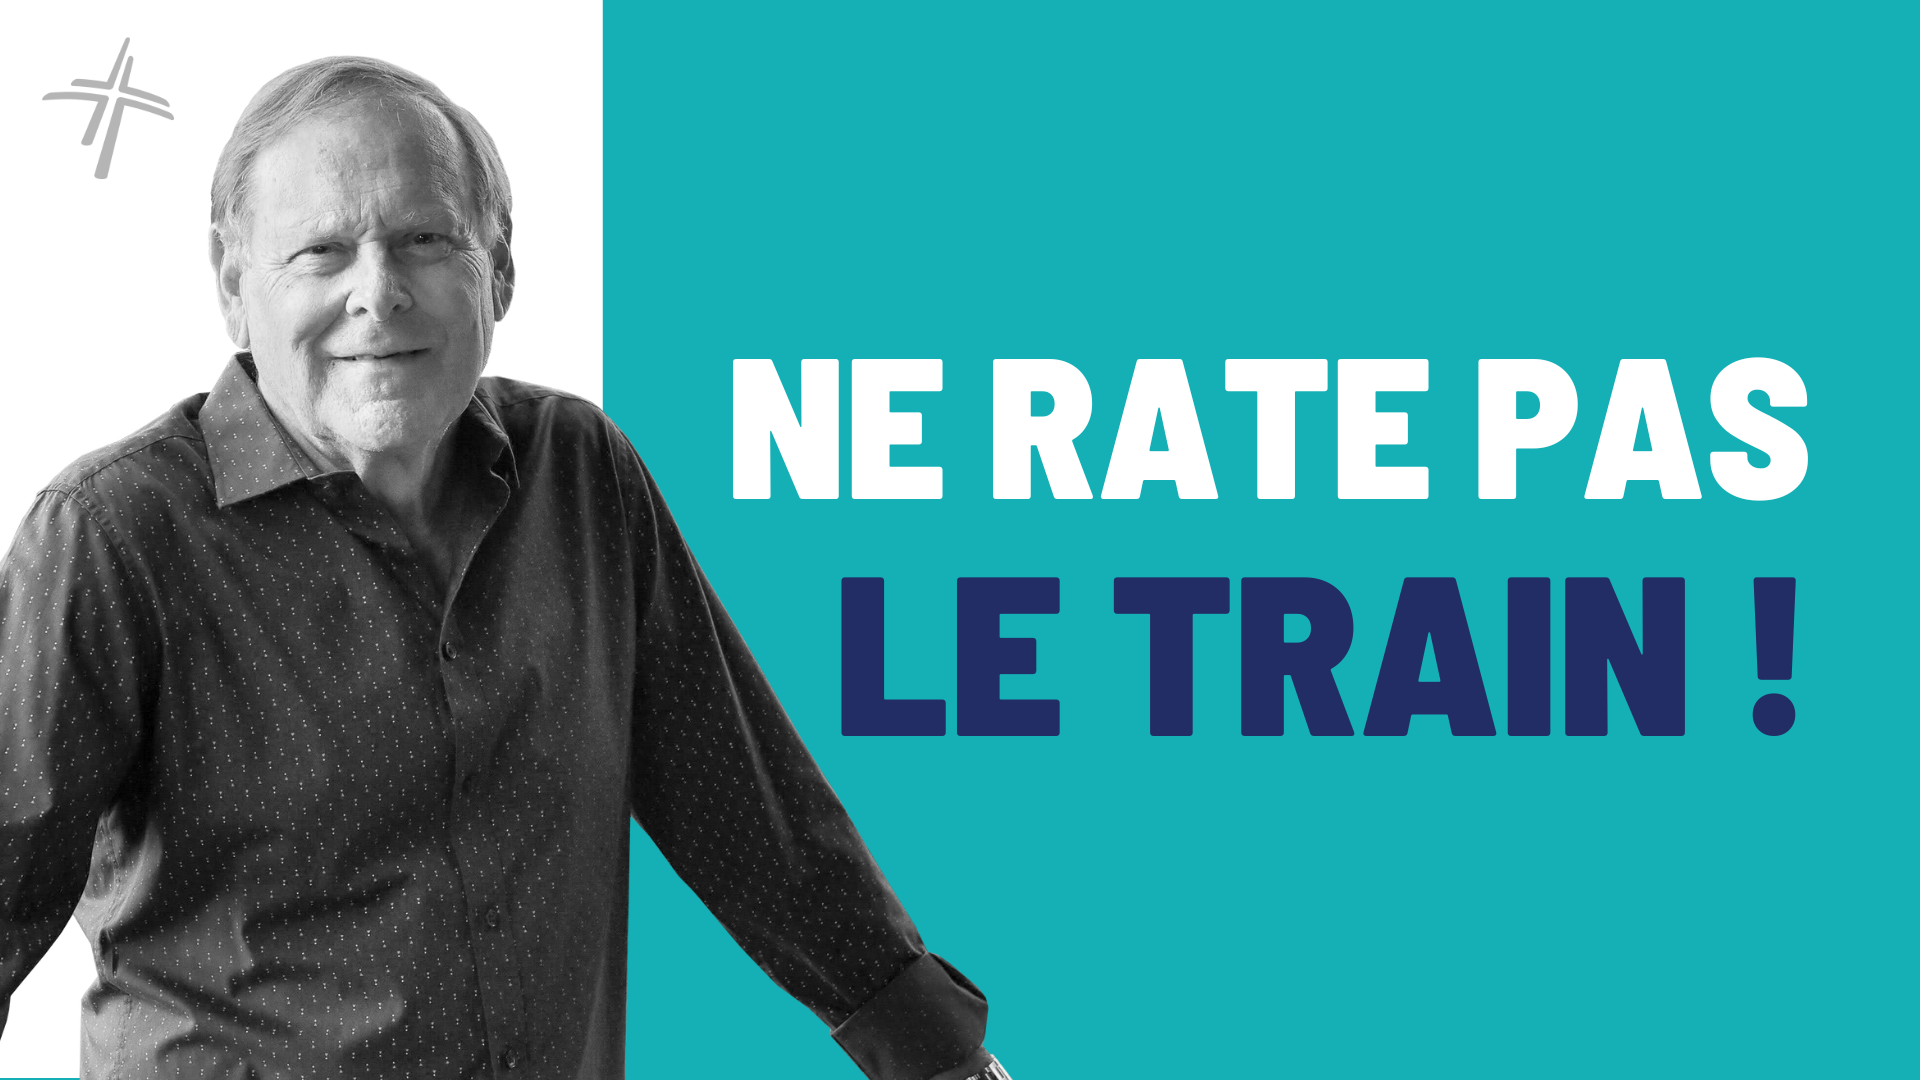 Featured image for “Ne rate pas le train !”